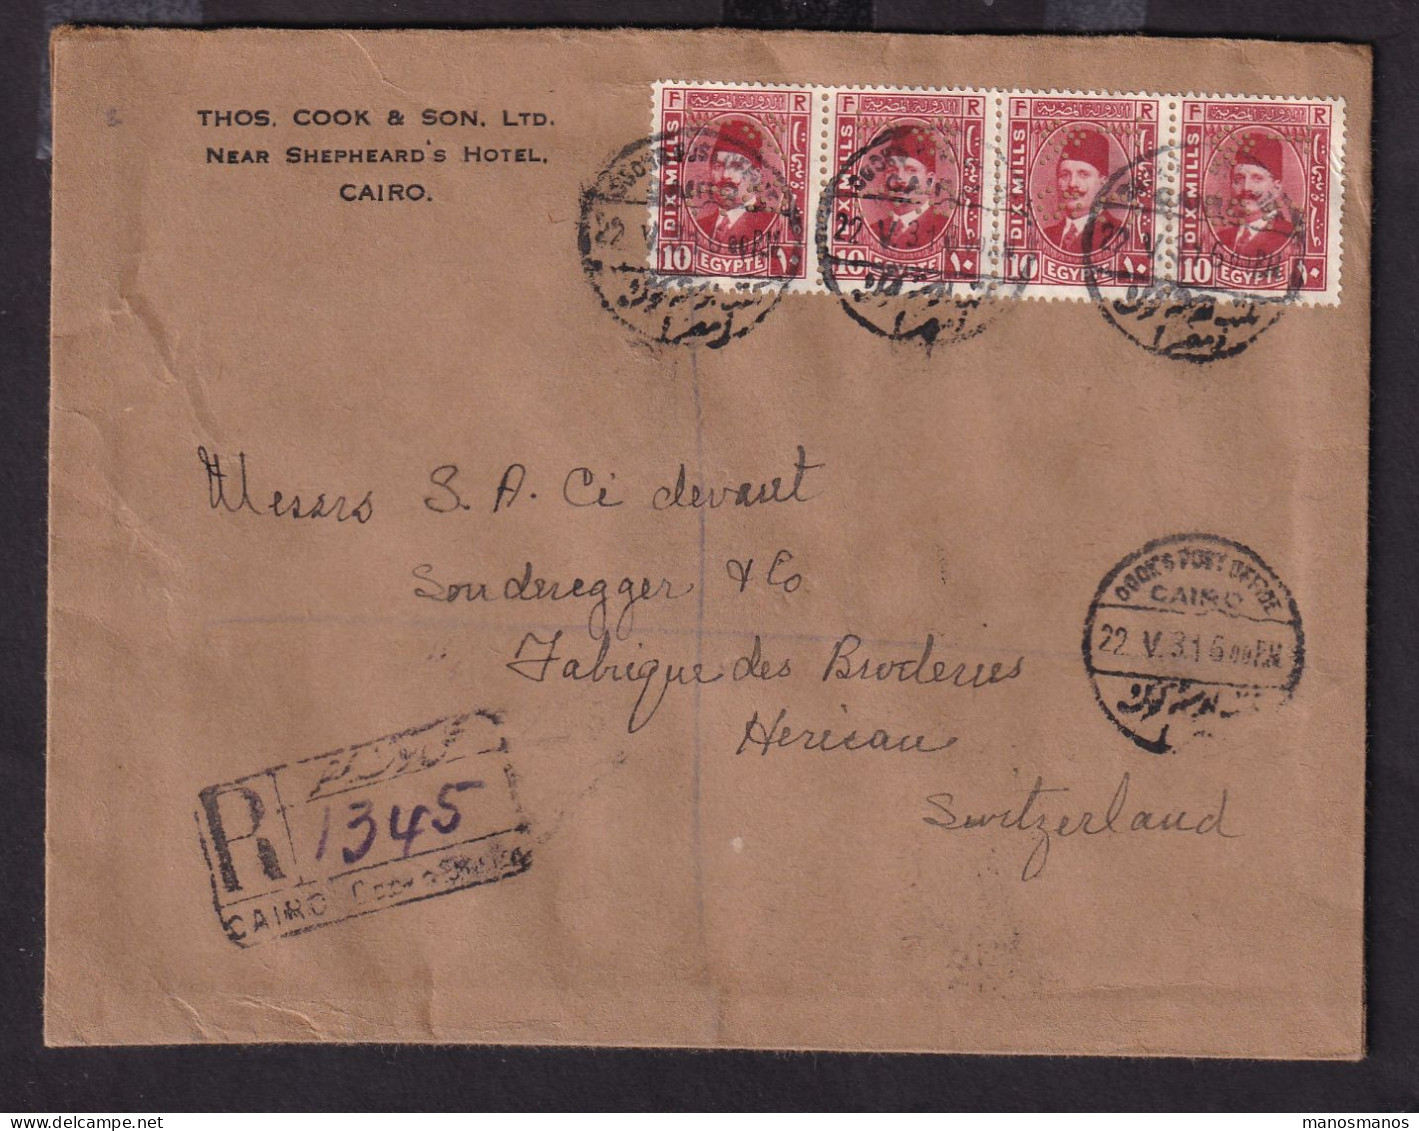 353/31 -- EGYPT PERFINS - Registered Envelope Fouad Stamps For 40 Mills COOK'S P.O. CAIRO 1931 - Perf. T.C. § S. - Briefe U. Dokumente